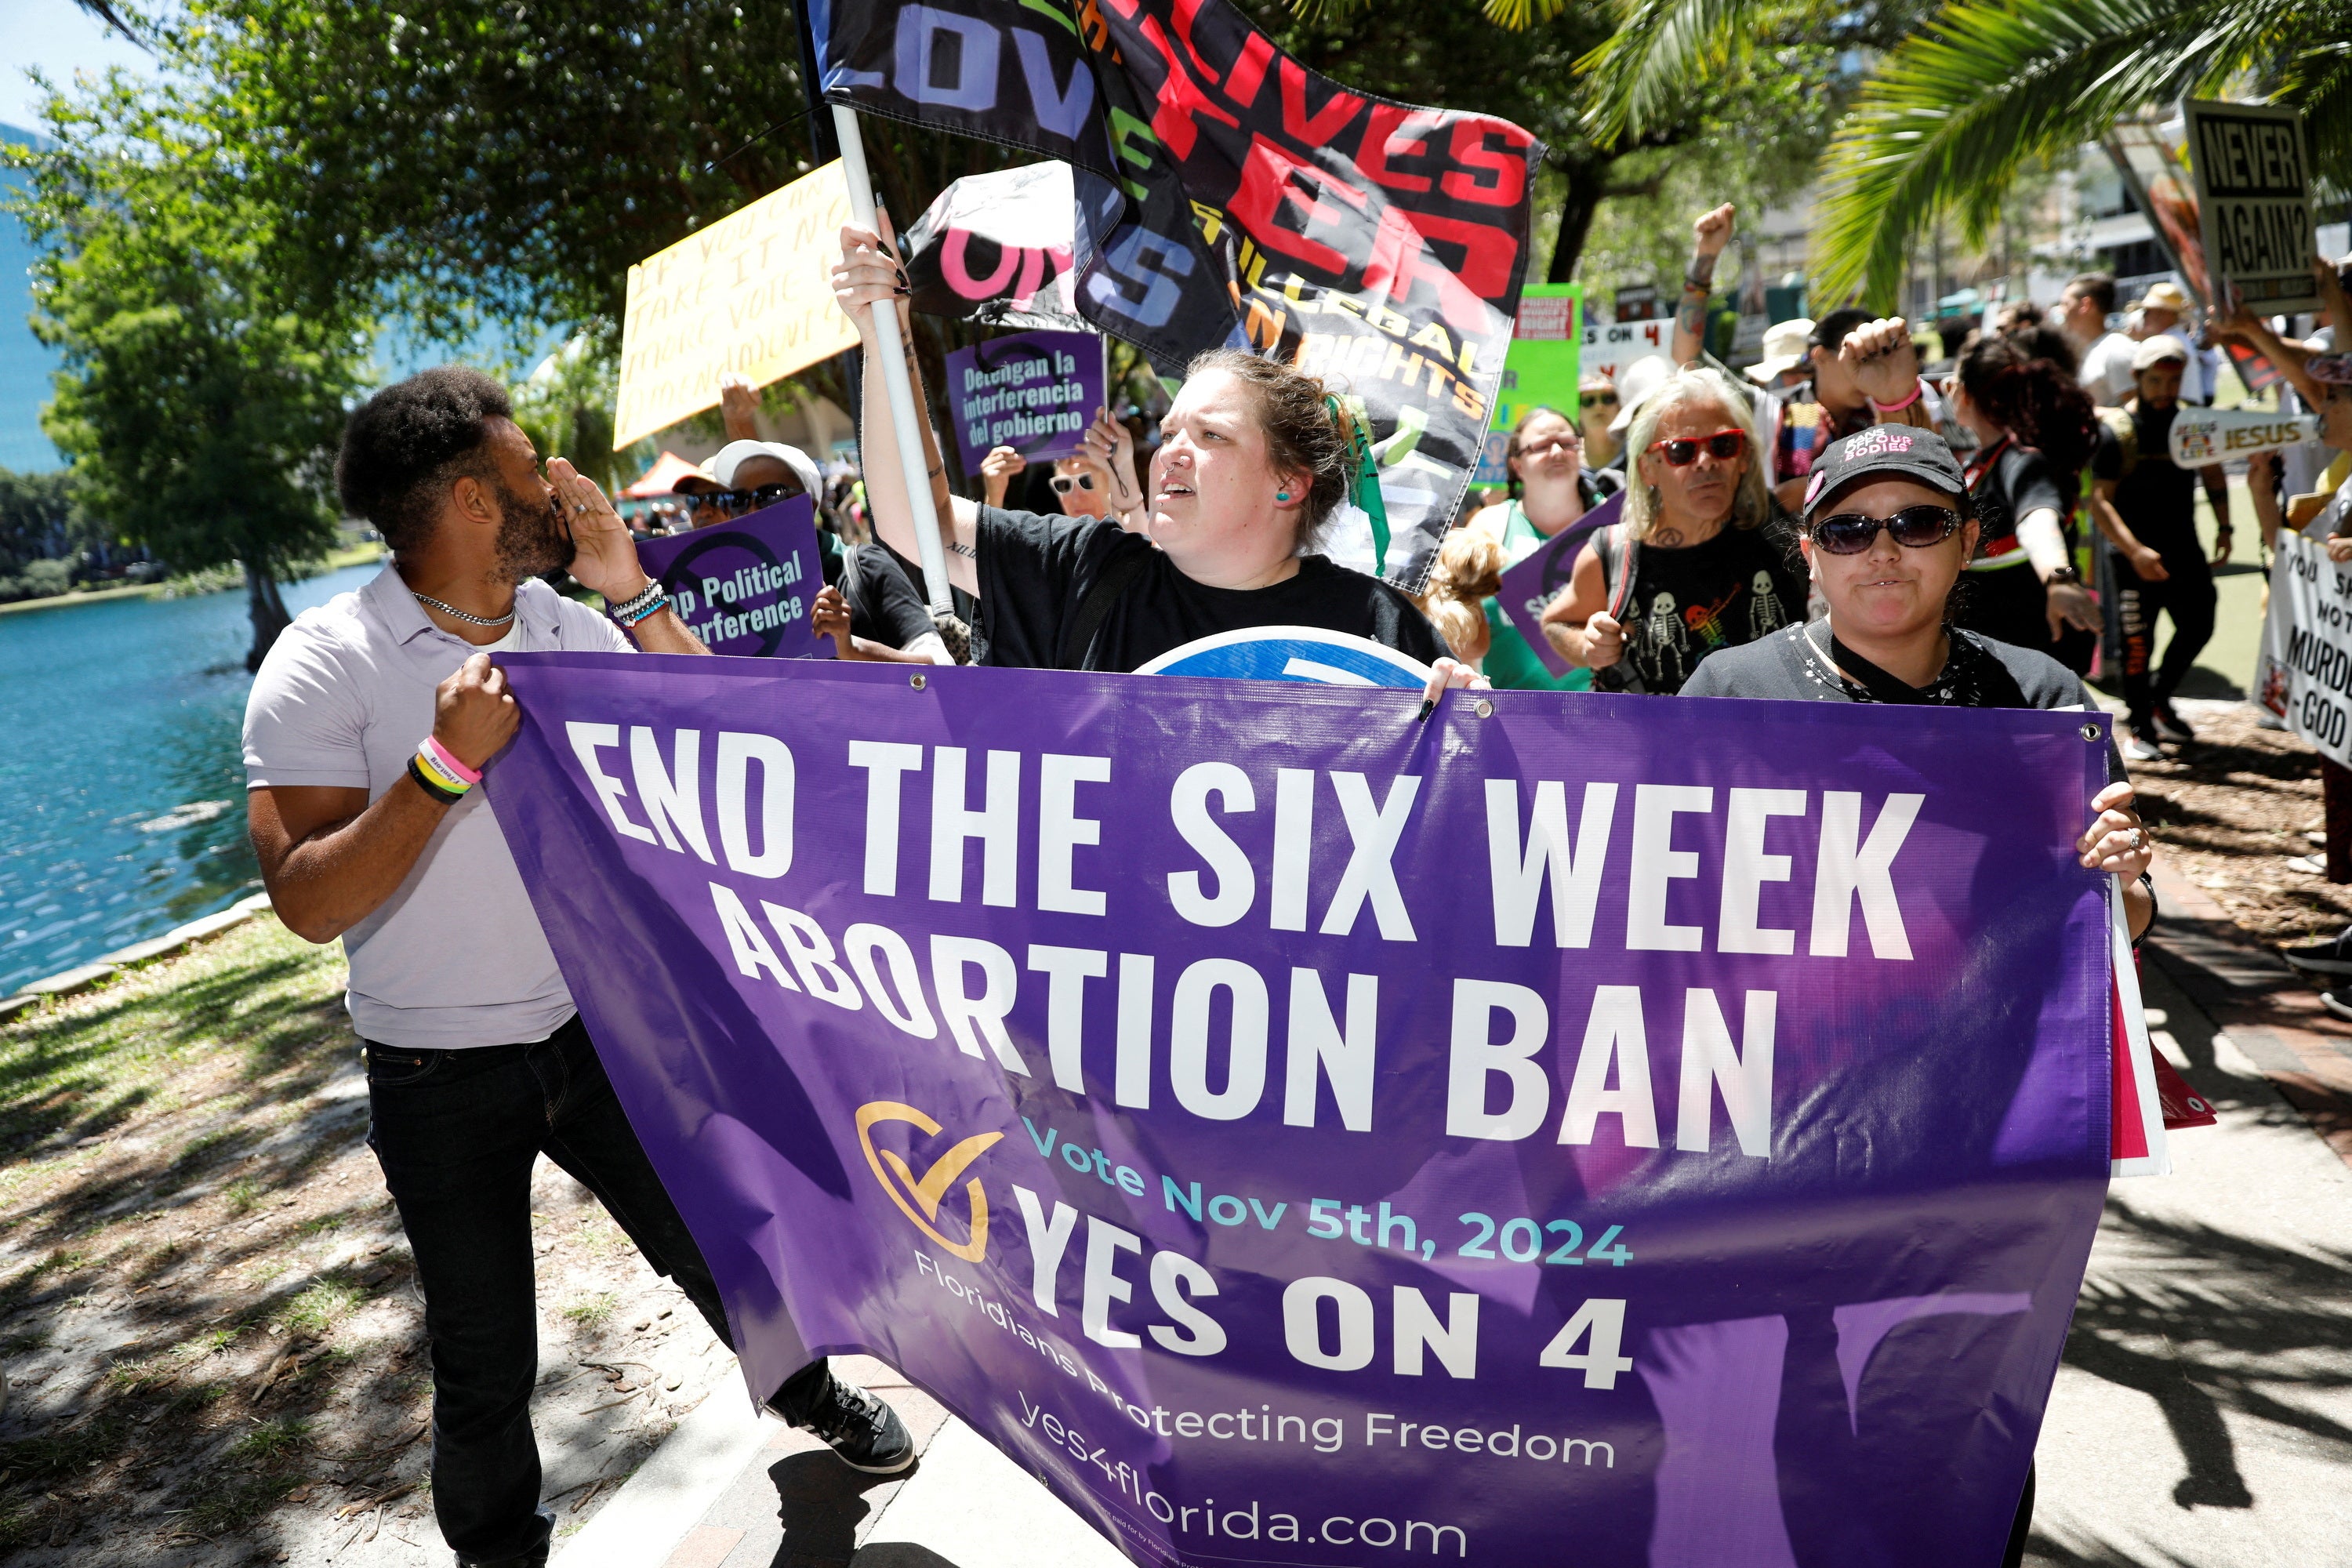 Abortion rights advocates gather to launch their 'Yes On 4' campaign with a march and rally against the six-week abortion ban ahead of November 5, when Florida voters will decide on whether there should be a right to abortion in the state, in Orlando, Florida, U.S. April 13, 2024